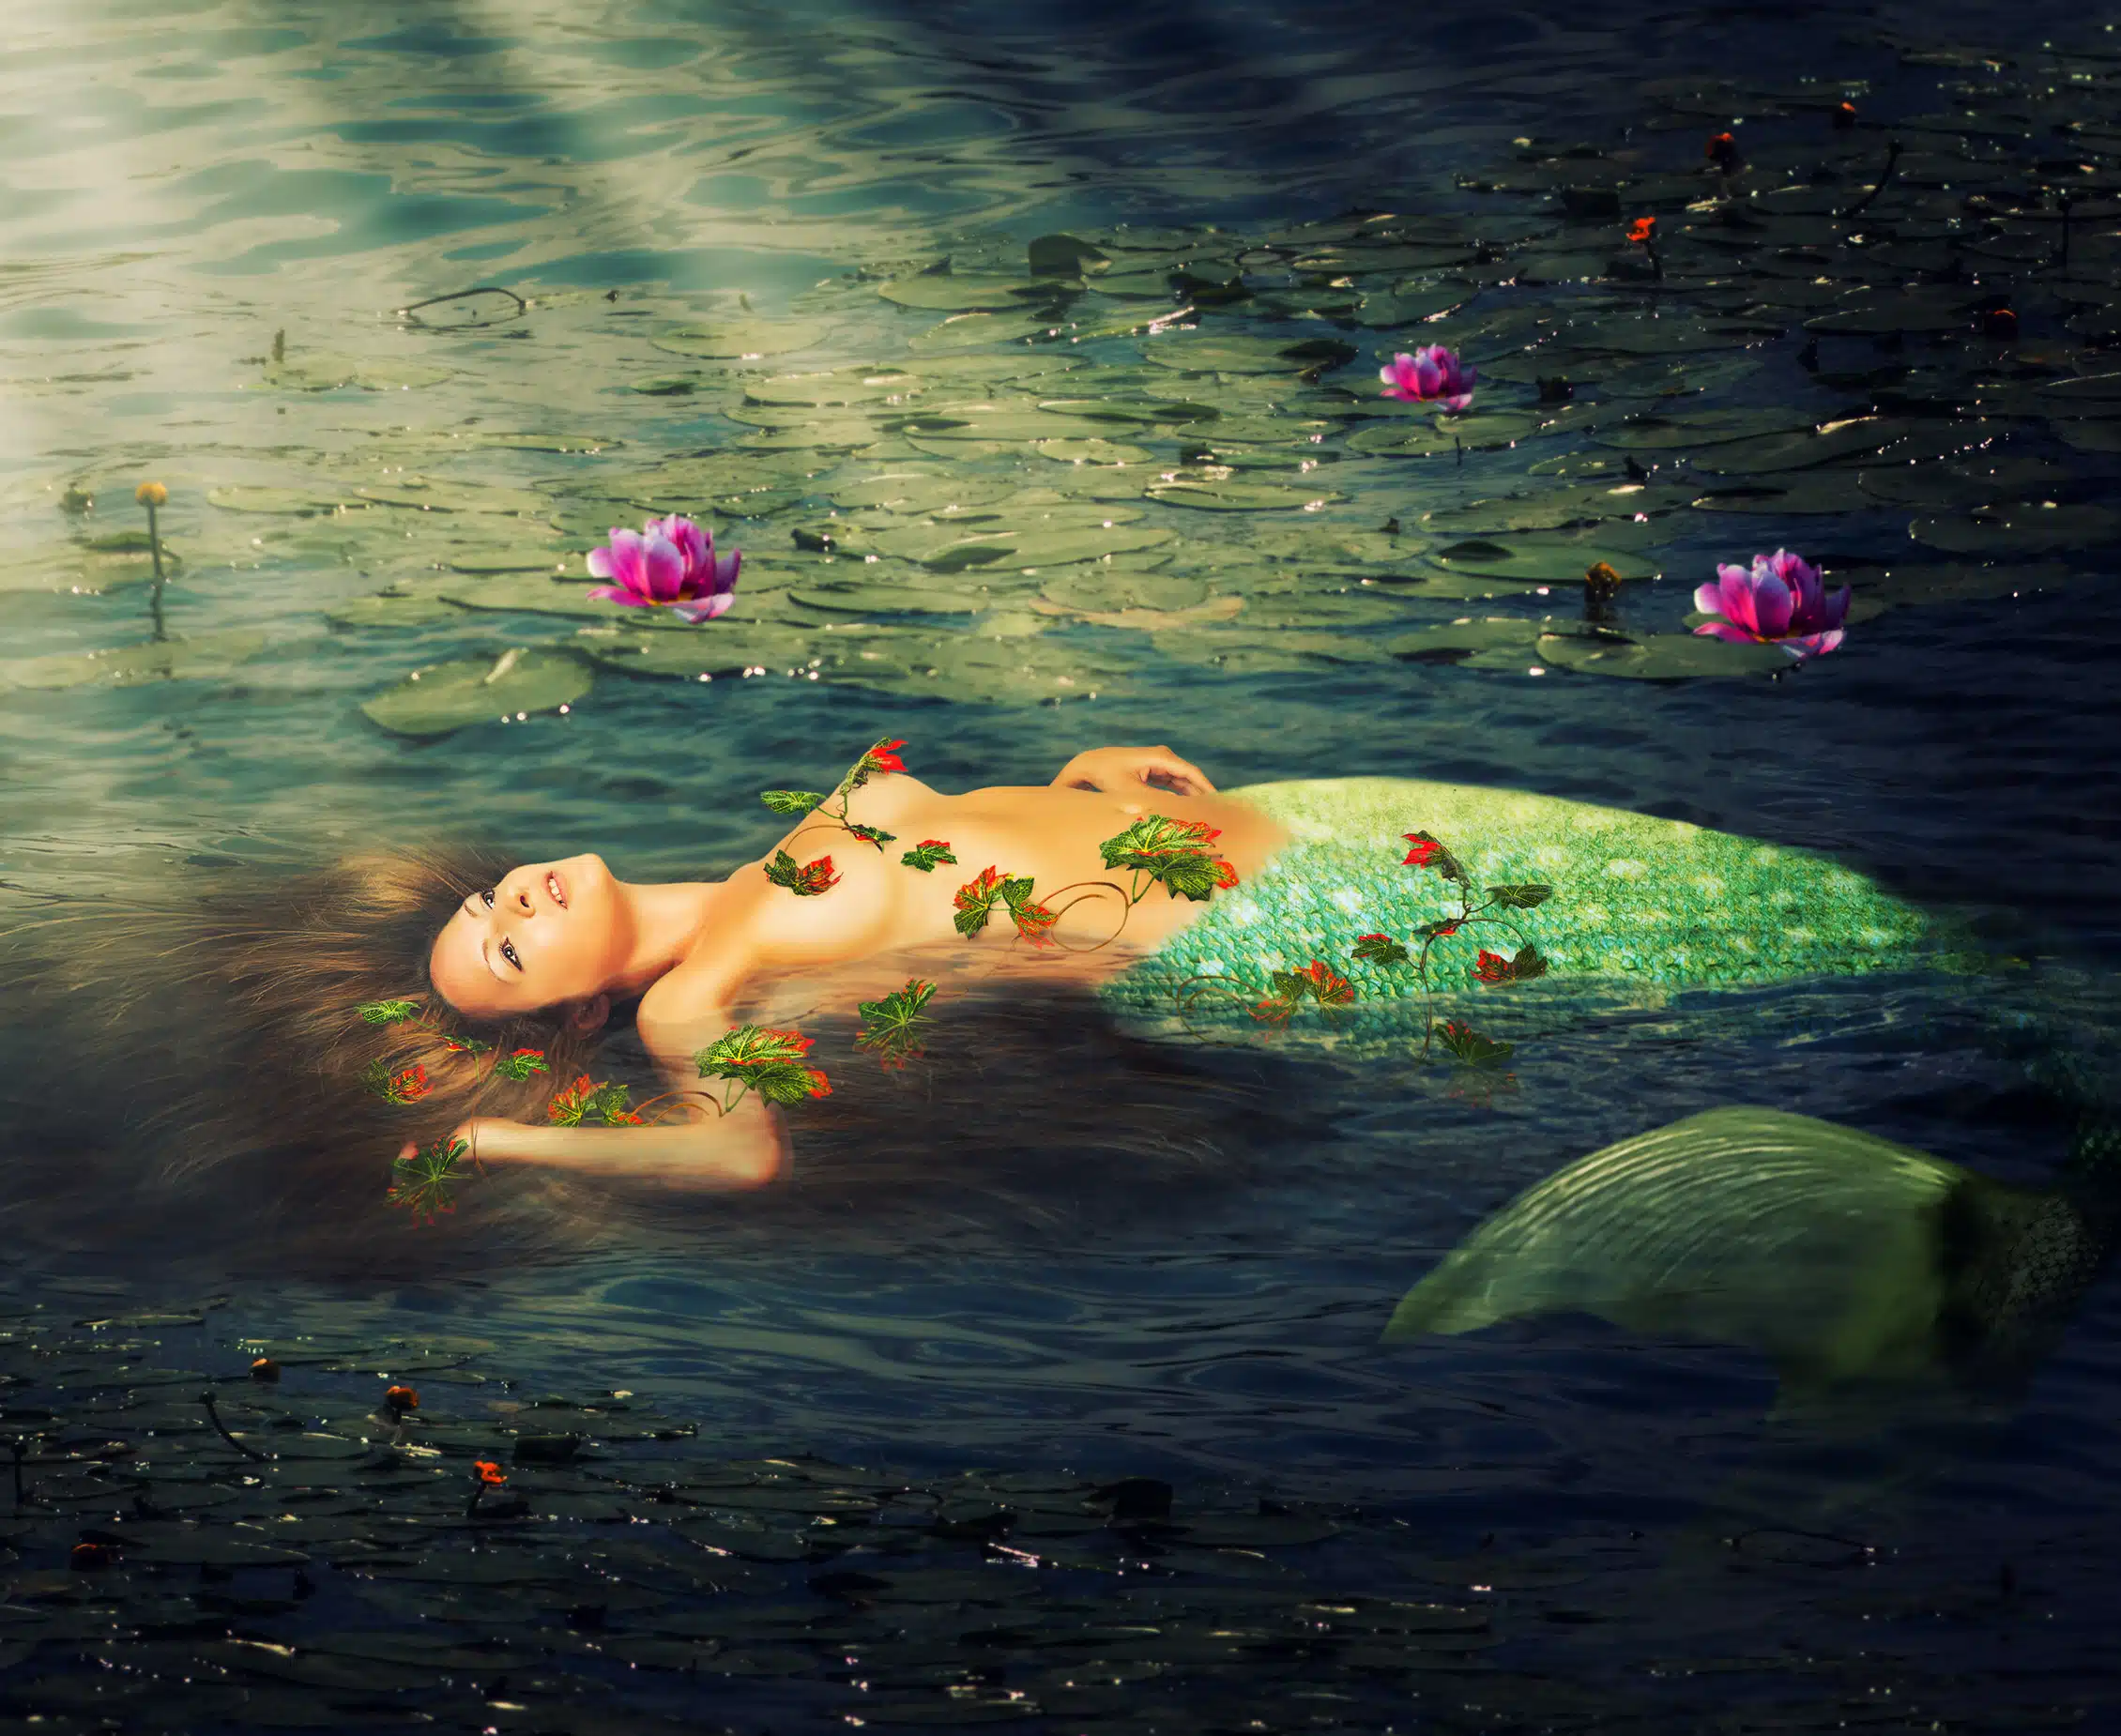 an enchanting mermaid lying in the water amidst water lilies